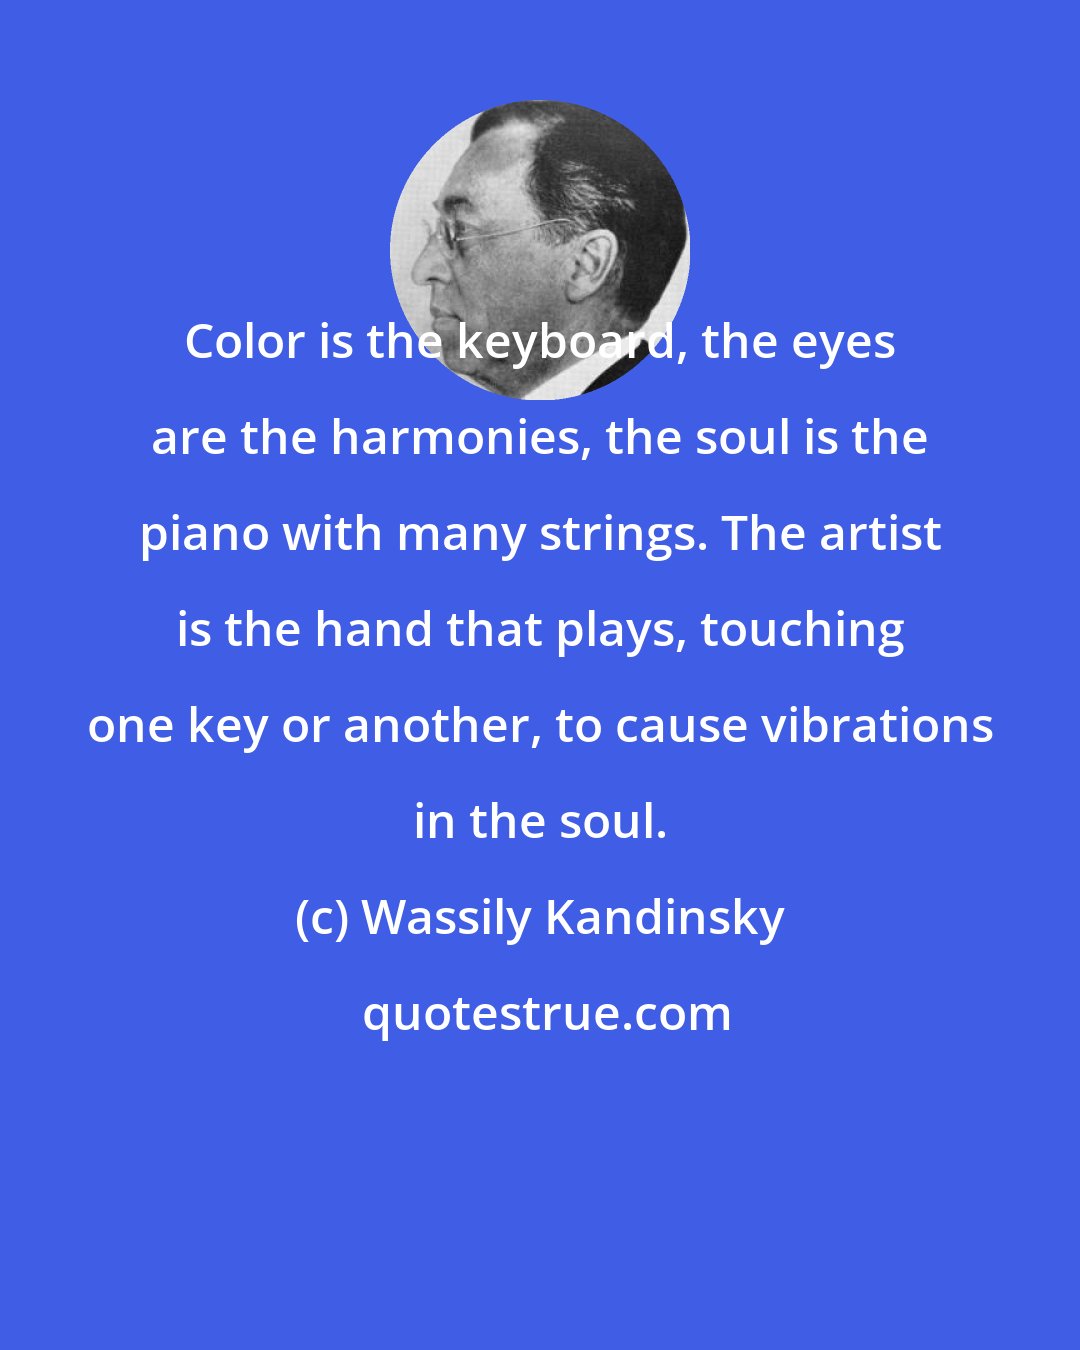 Wassily Kandinsky: Color is the keyboard, the eyes are the harmonies, the soul is the piano with many strings. The artist is the hand that plays, touching one key or another, to cause vibrations in the soul.